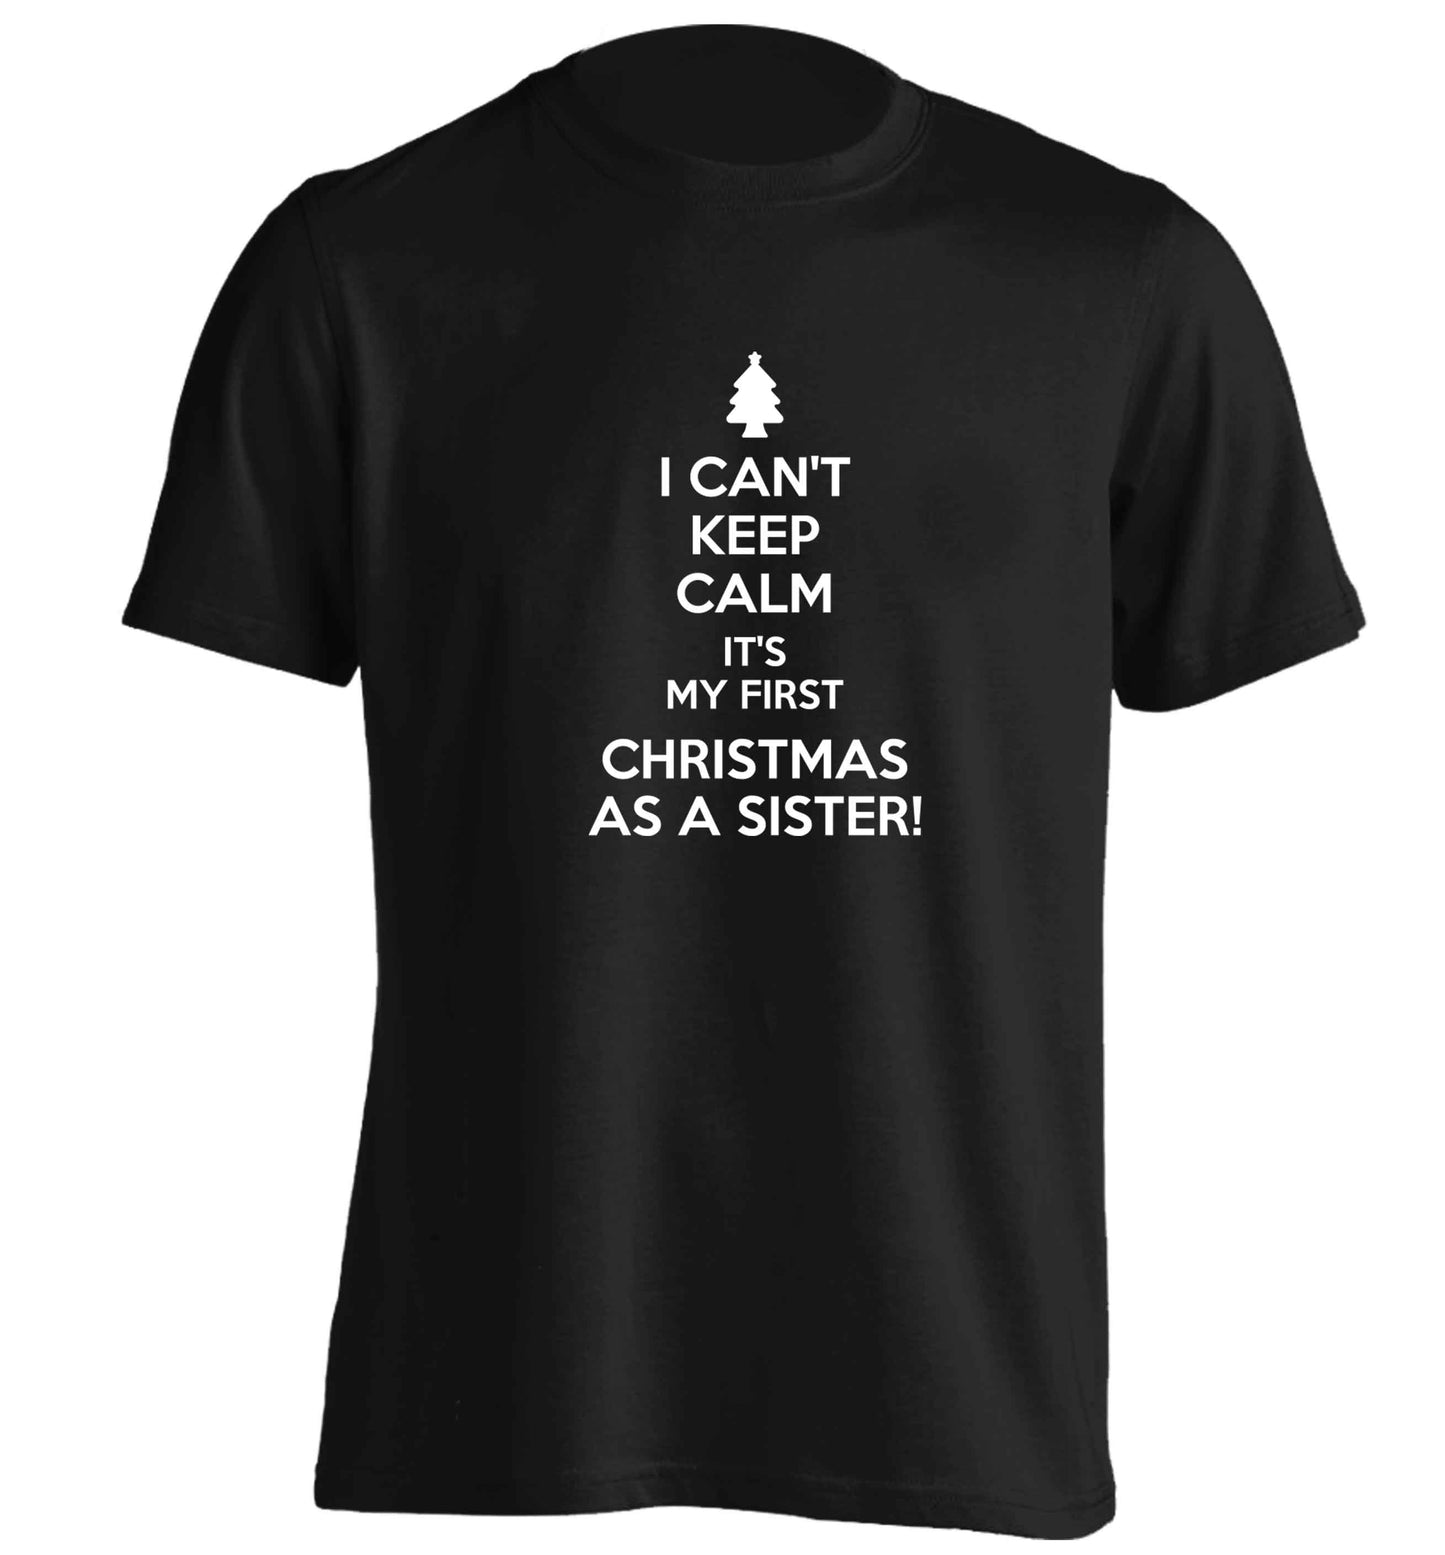 I can't keep calm it's my first Christmas as a sister! adults unisex black Tshirt 2XL